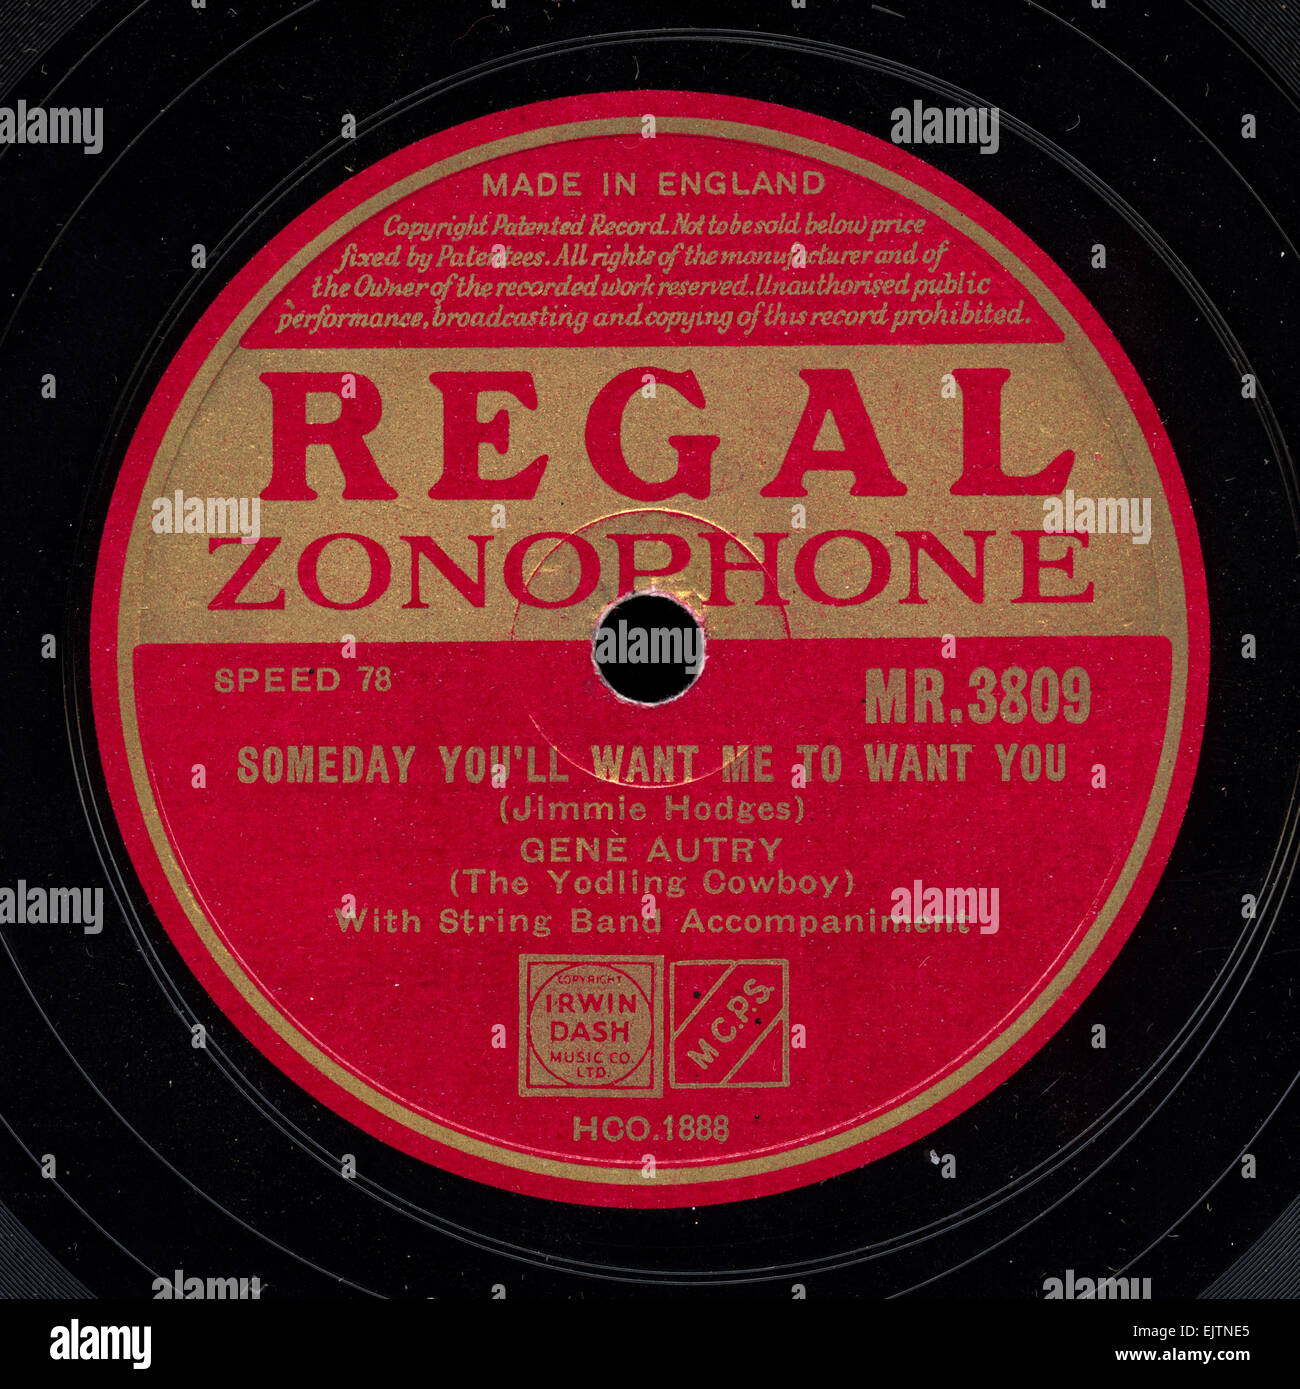 Regal Zonophone 78 rpm record label released September 1948 (UK) “Someday  You'll Want me to Want You” by Gene Autry Stock Photo - Alamy